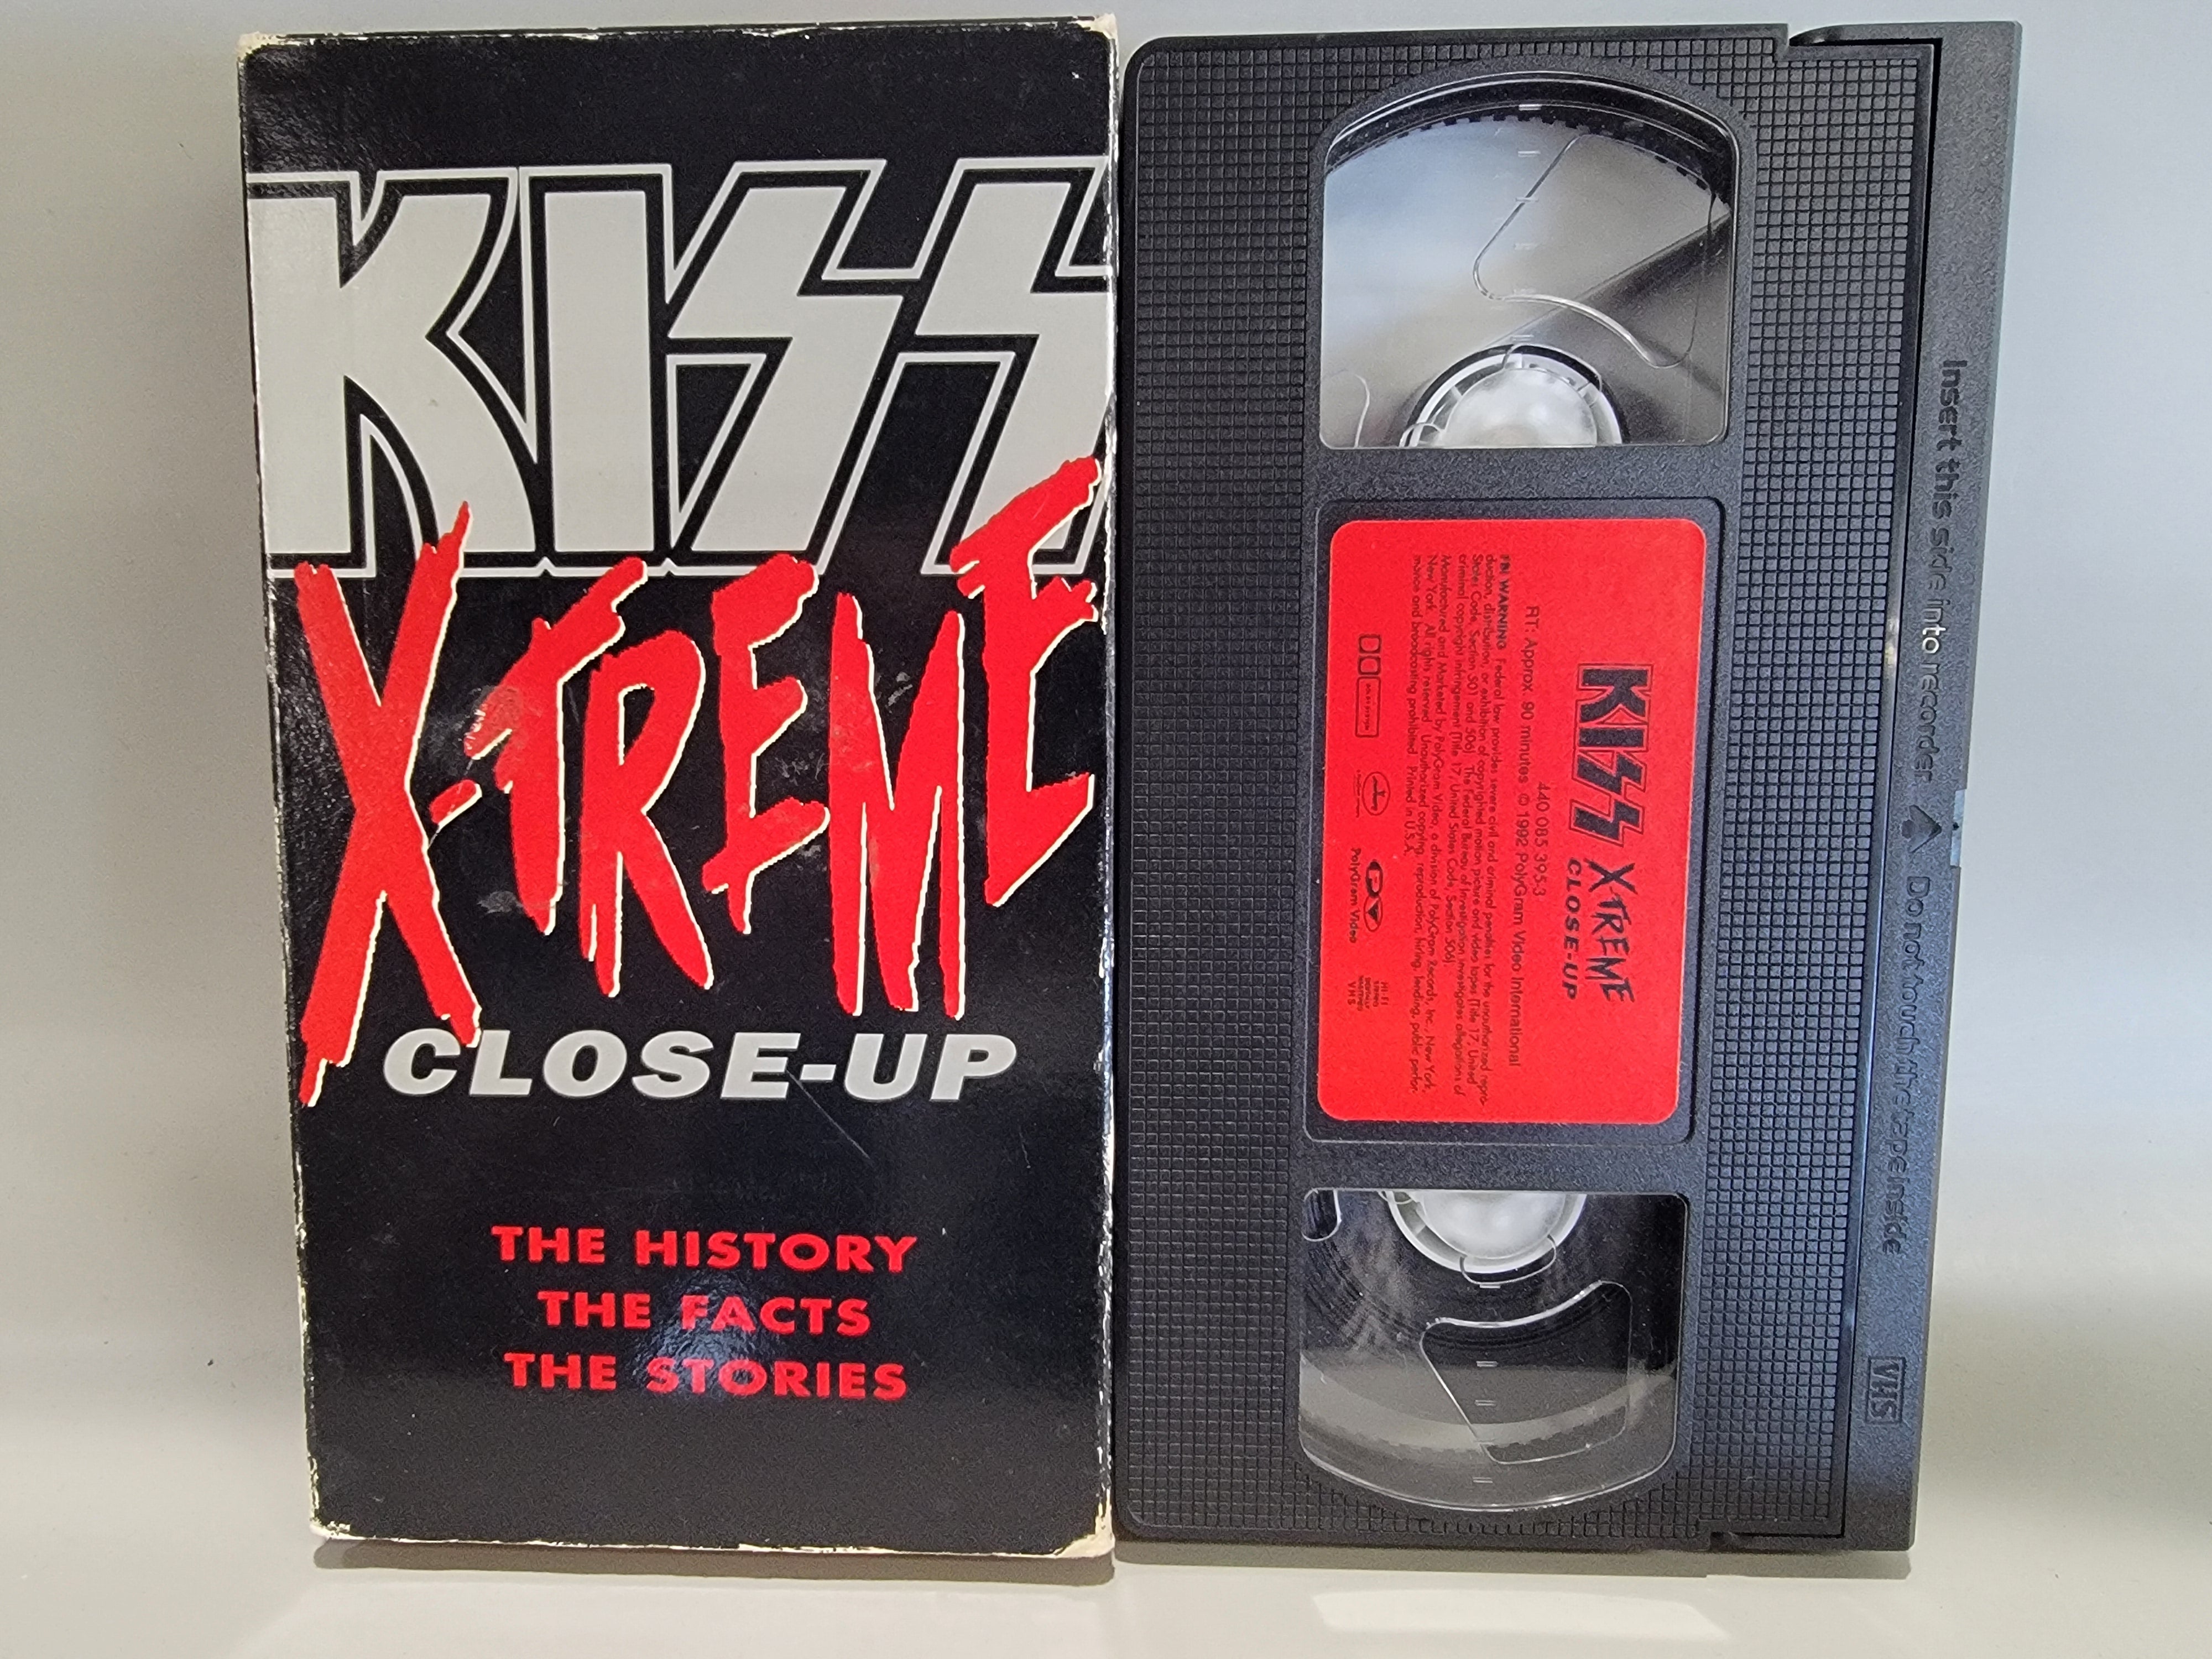 KISS X-TREME CLOSE-UP VHS [USED]